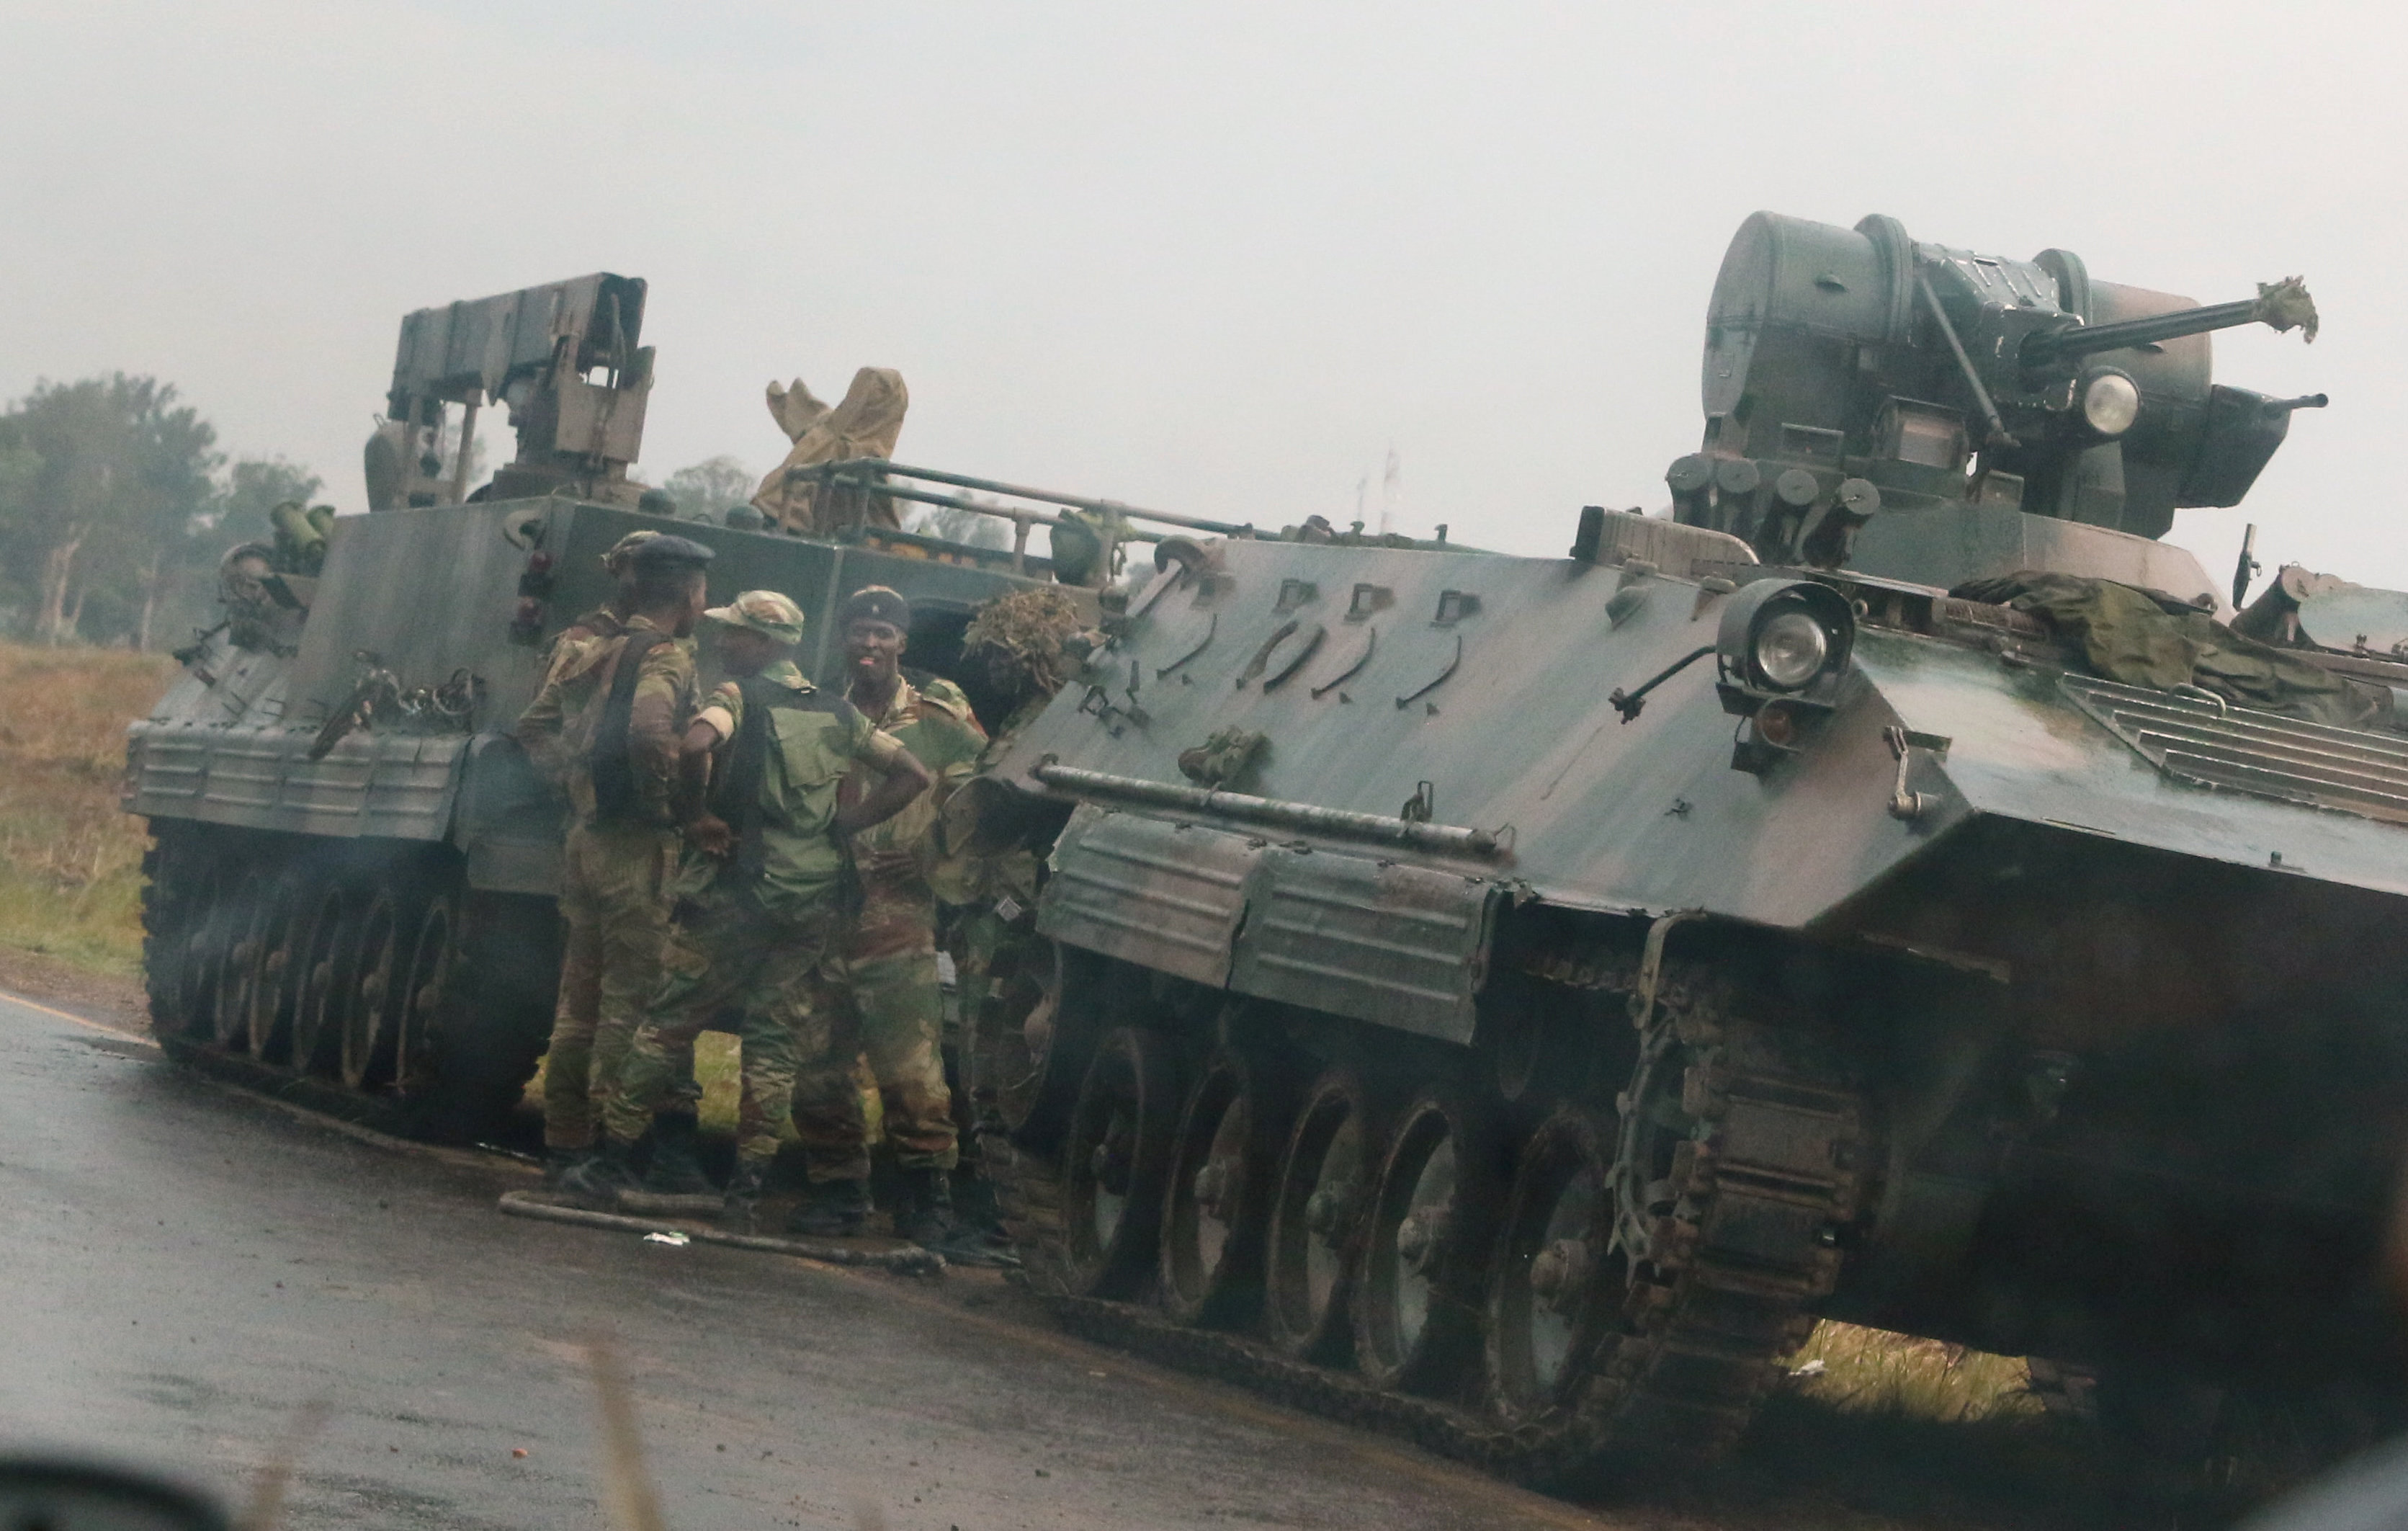 Tanks seen near Zimbabwe capital but streets calm as political tensions rise